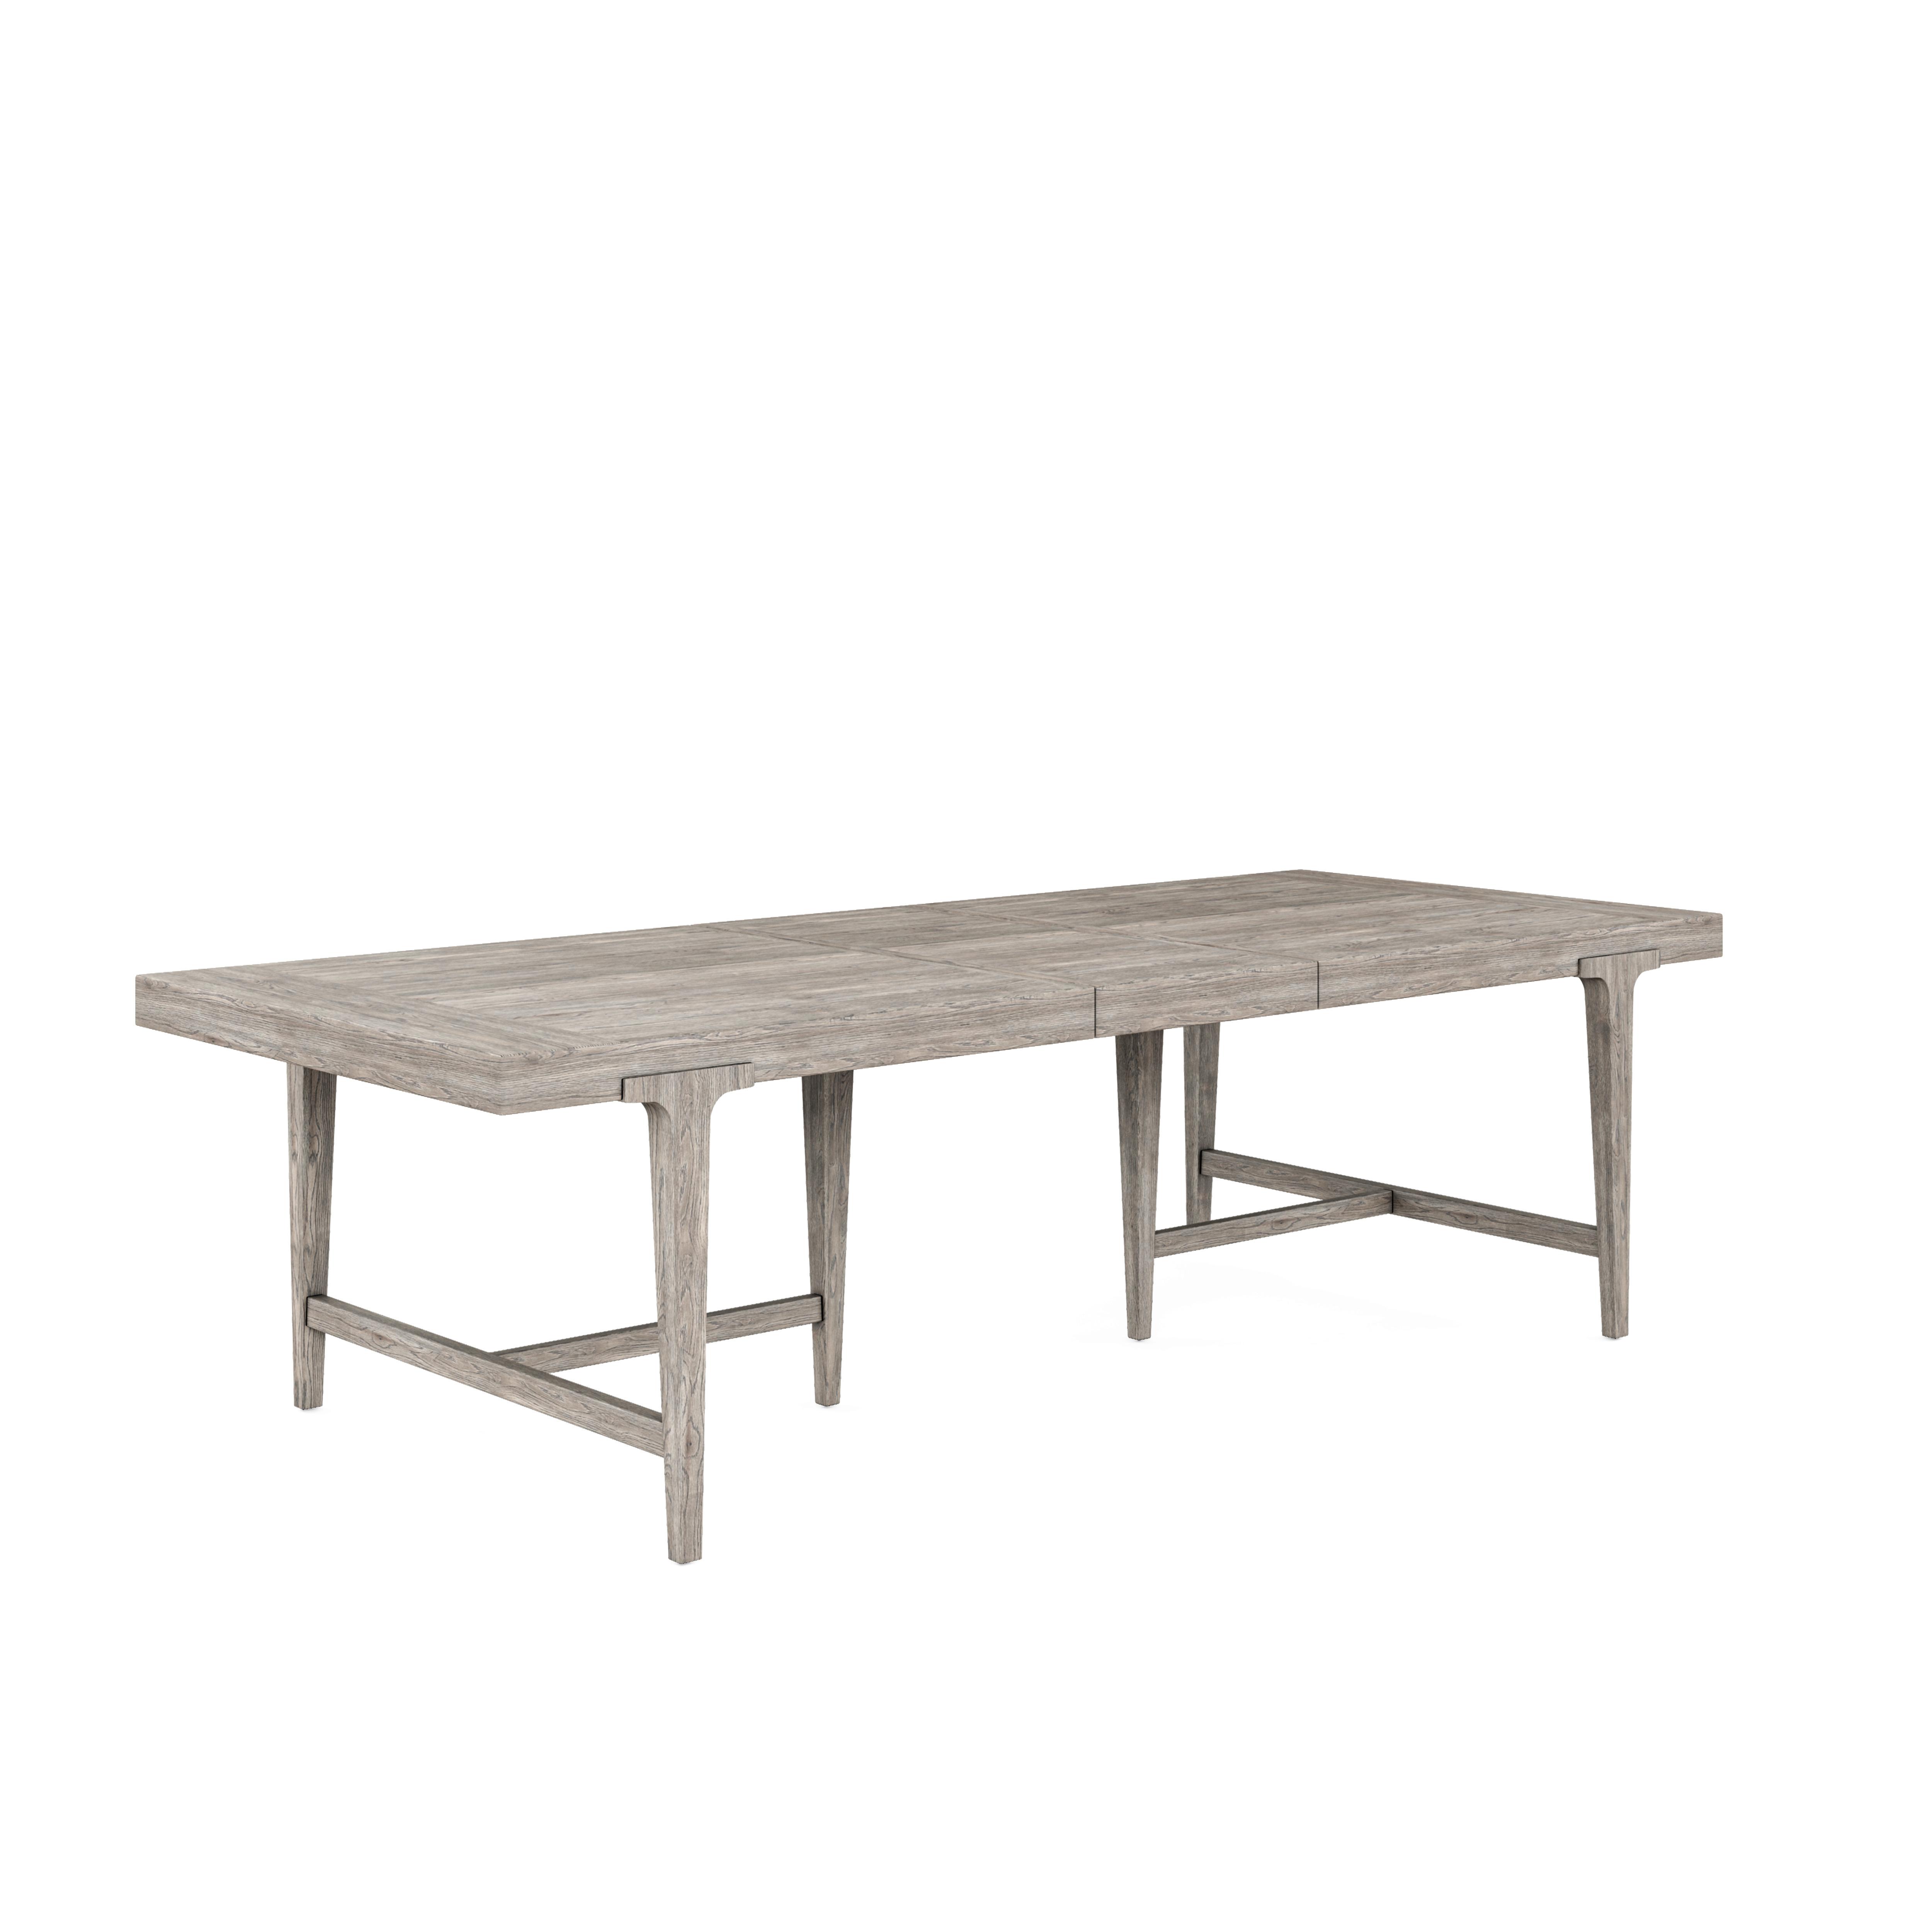 Traditional, Farmhouse Dining Table Sojourn 316220-2311 in Beige 